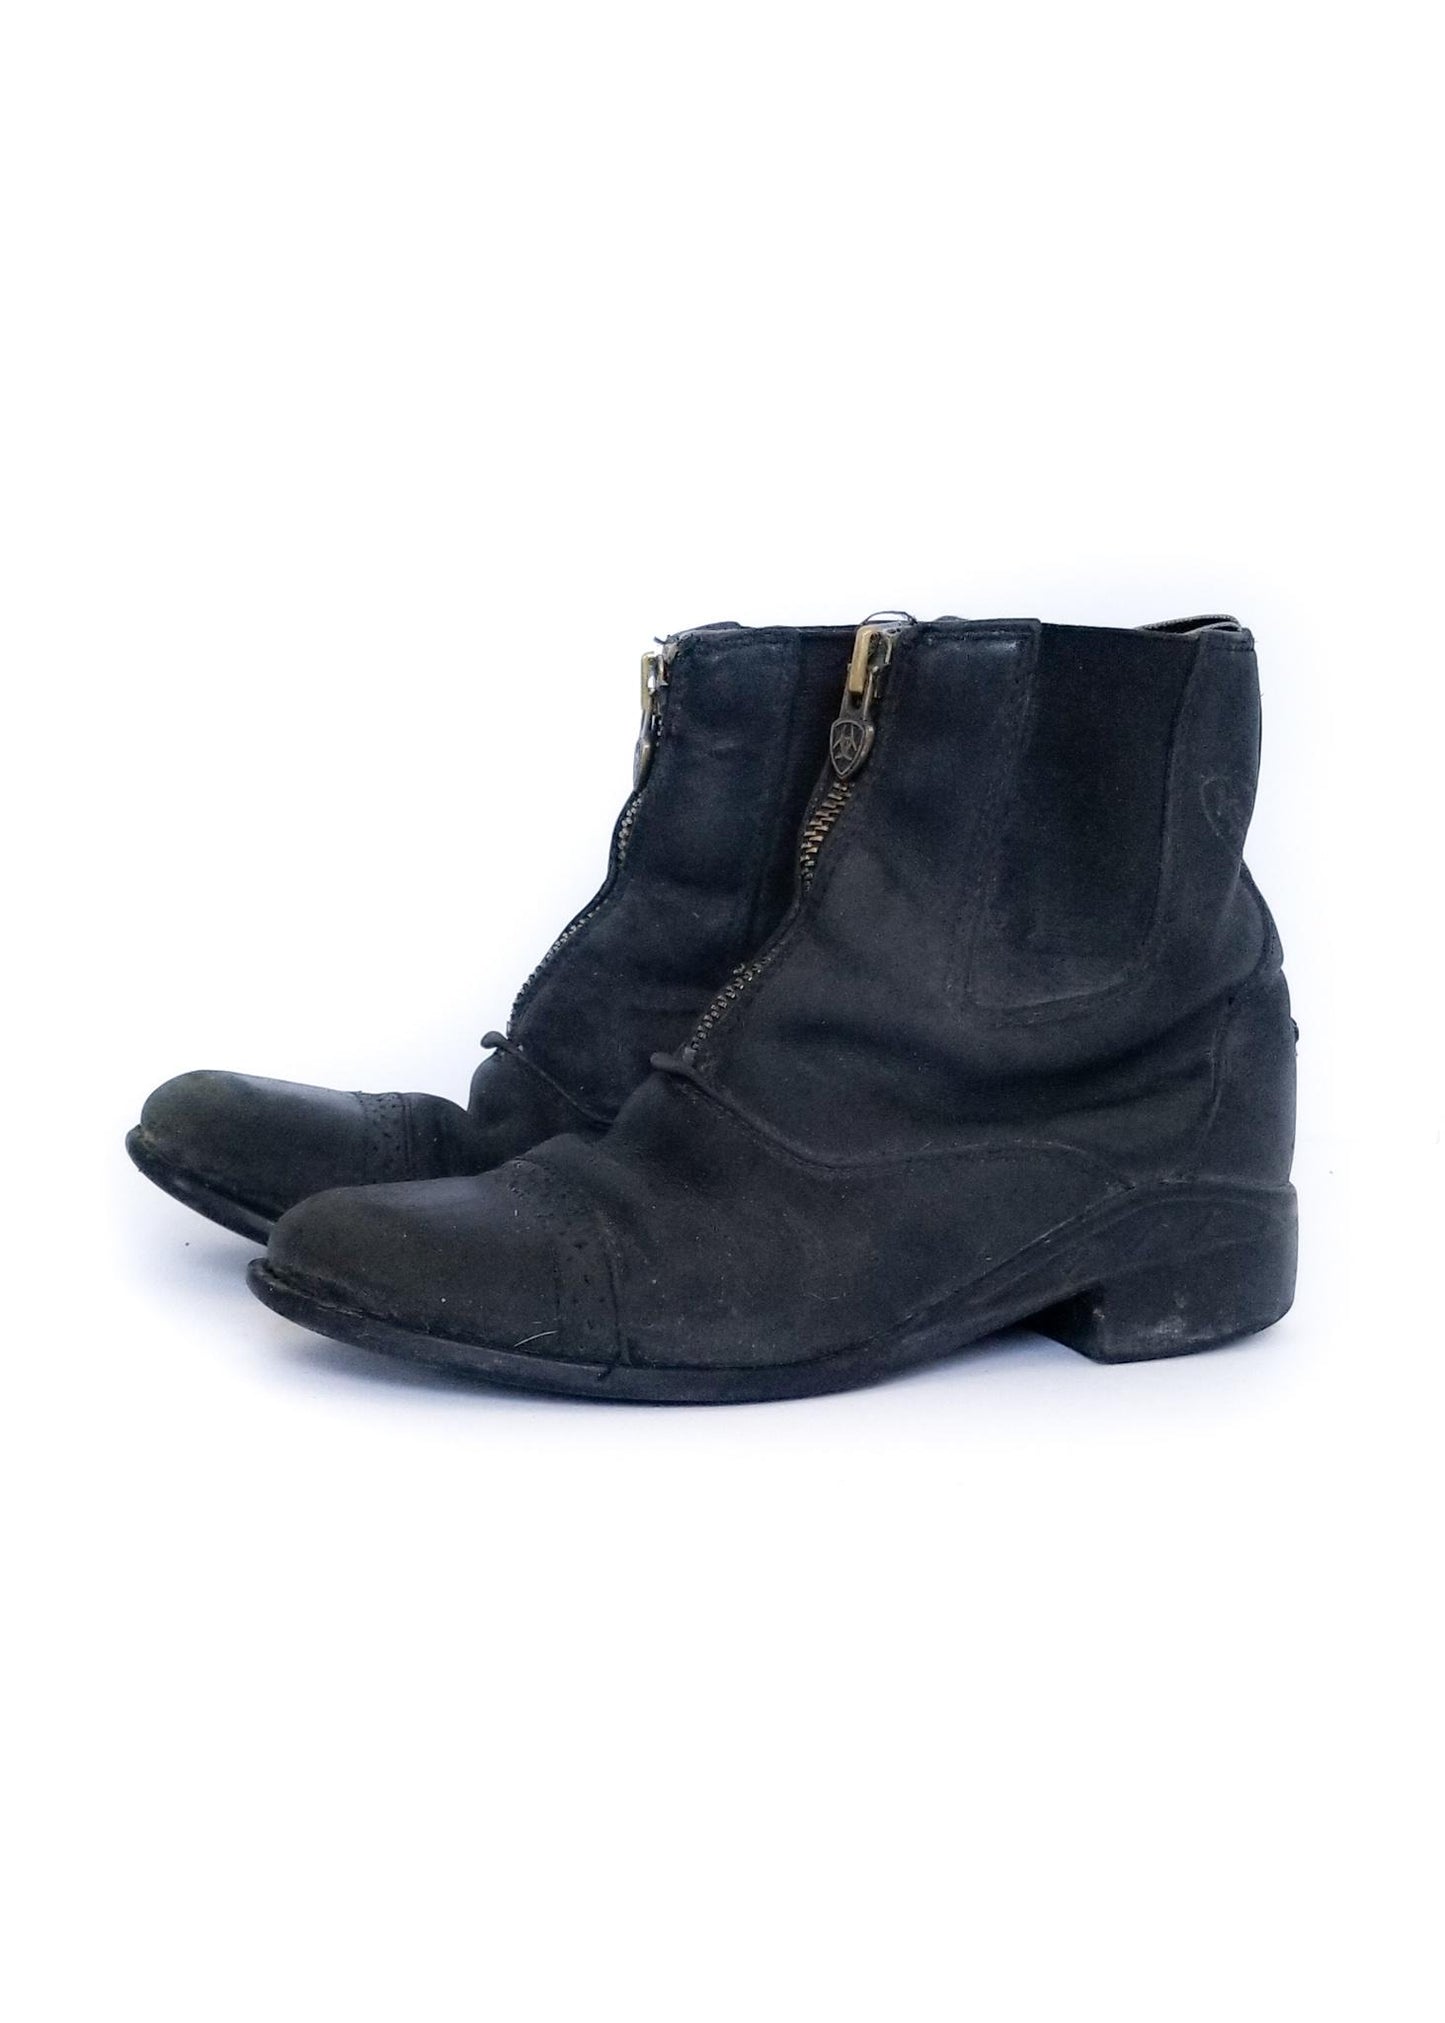 Ariat Paddock Boots - Black - Youth 1